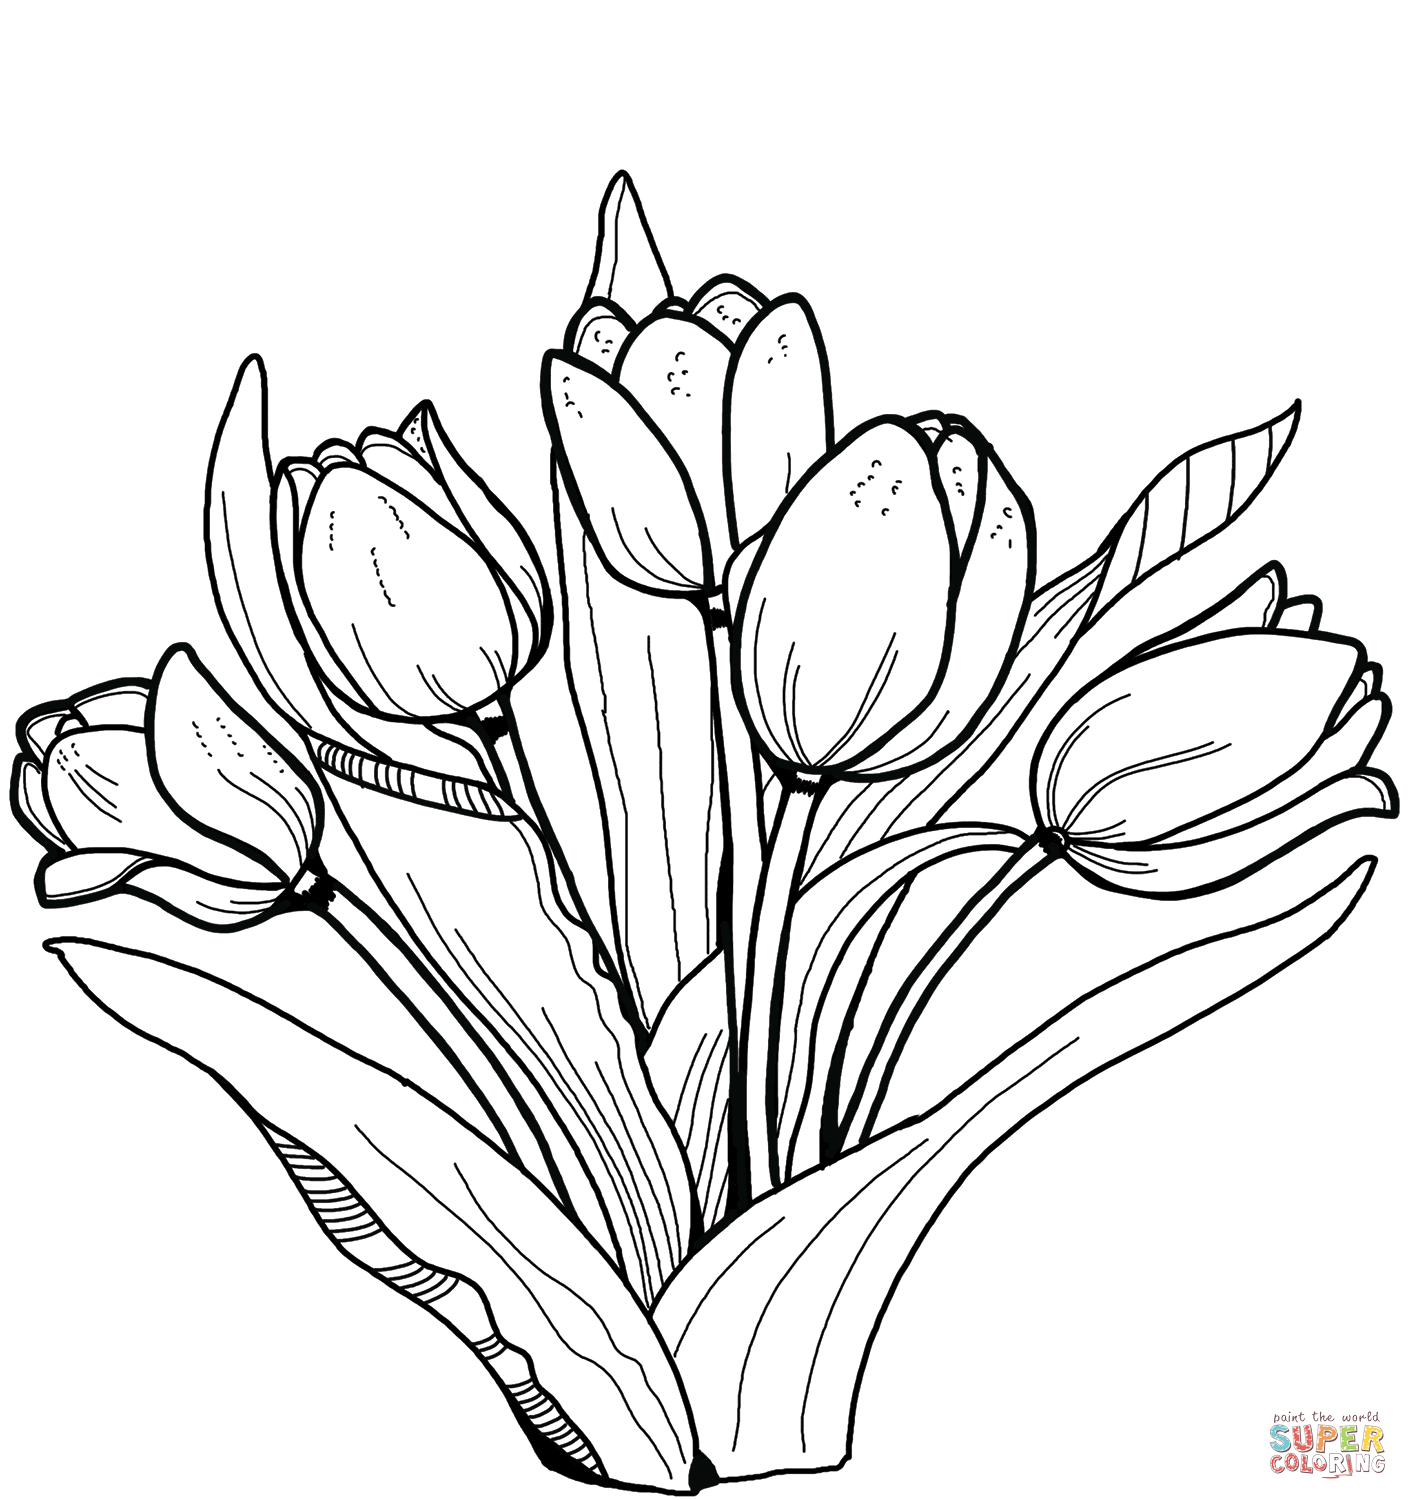 Tulips coloring page free printable coloring pages tulip drawing free printable coloring pages coloring pages